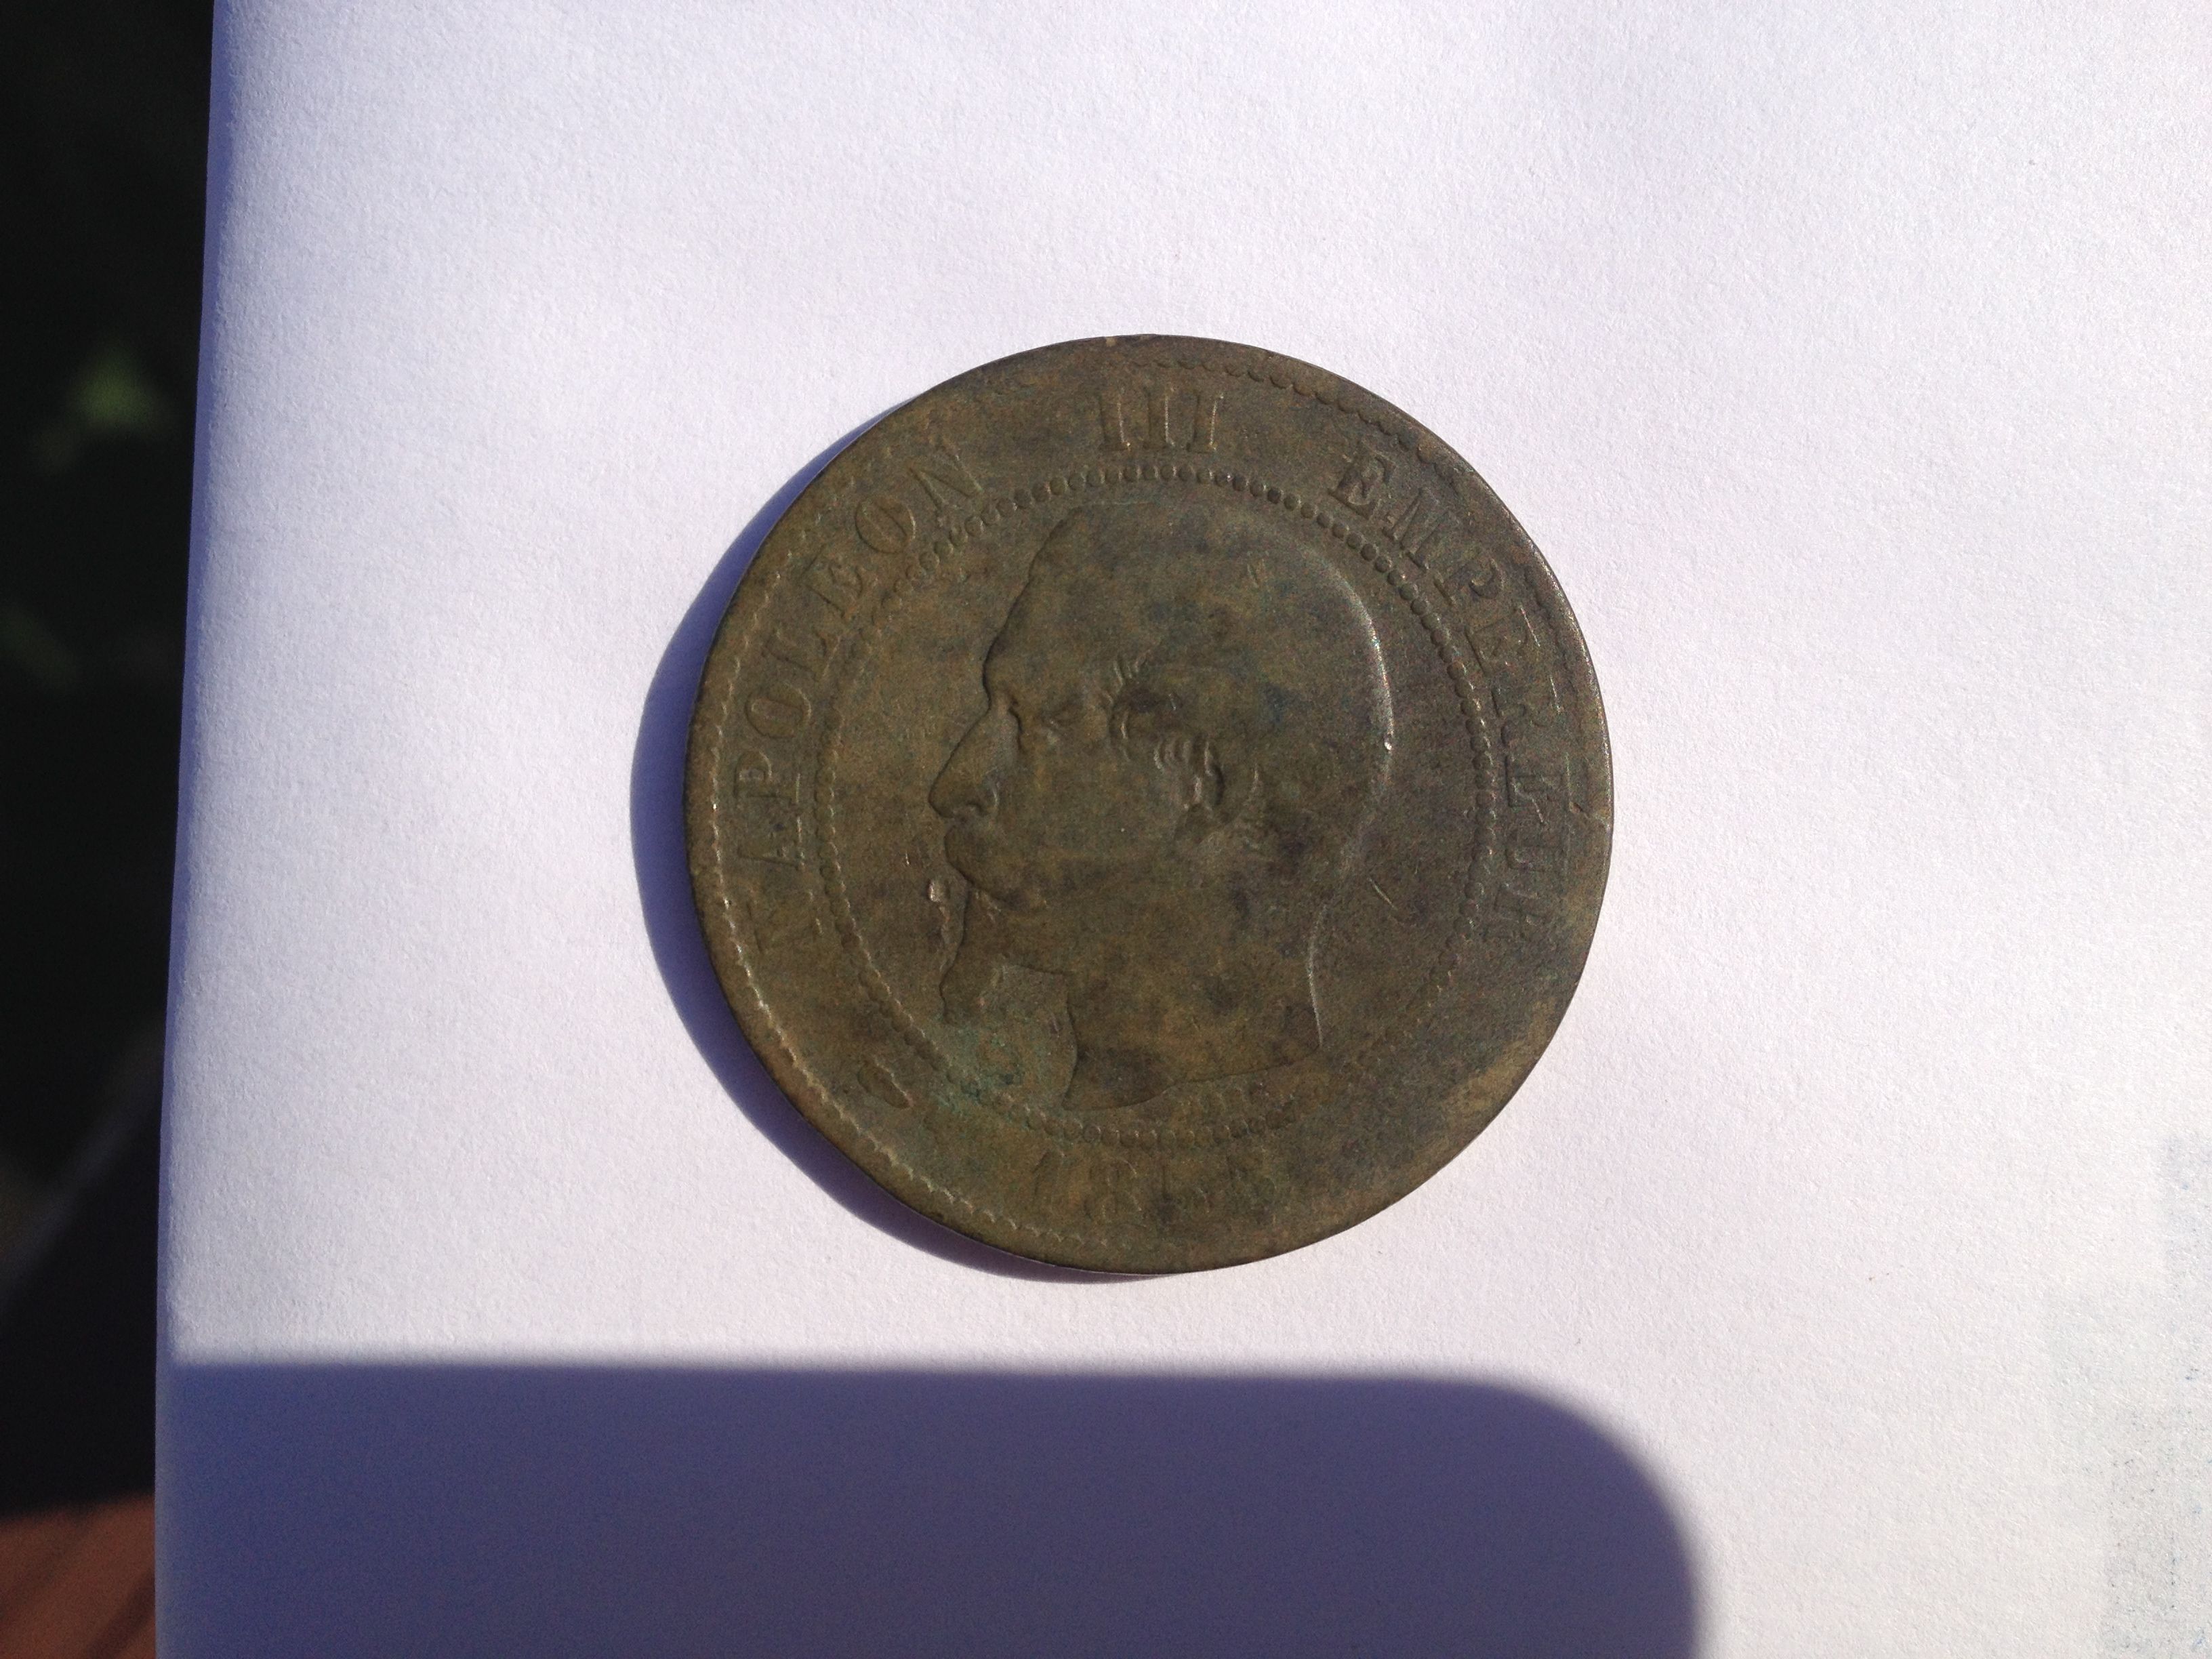 1855 French coin   Dix centimes